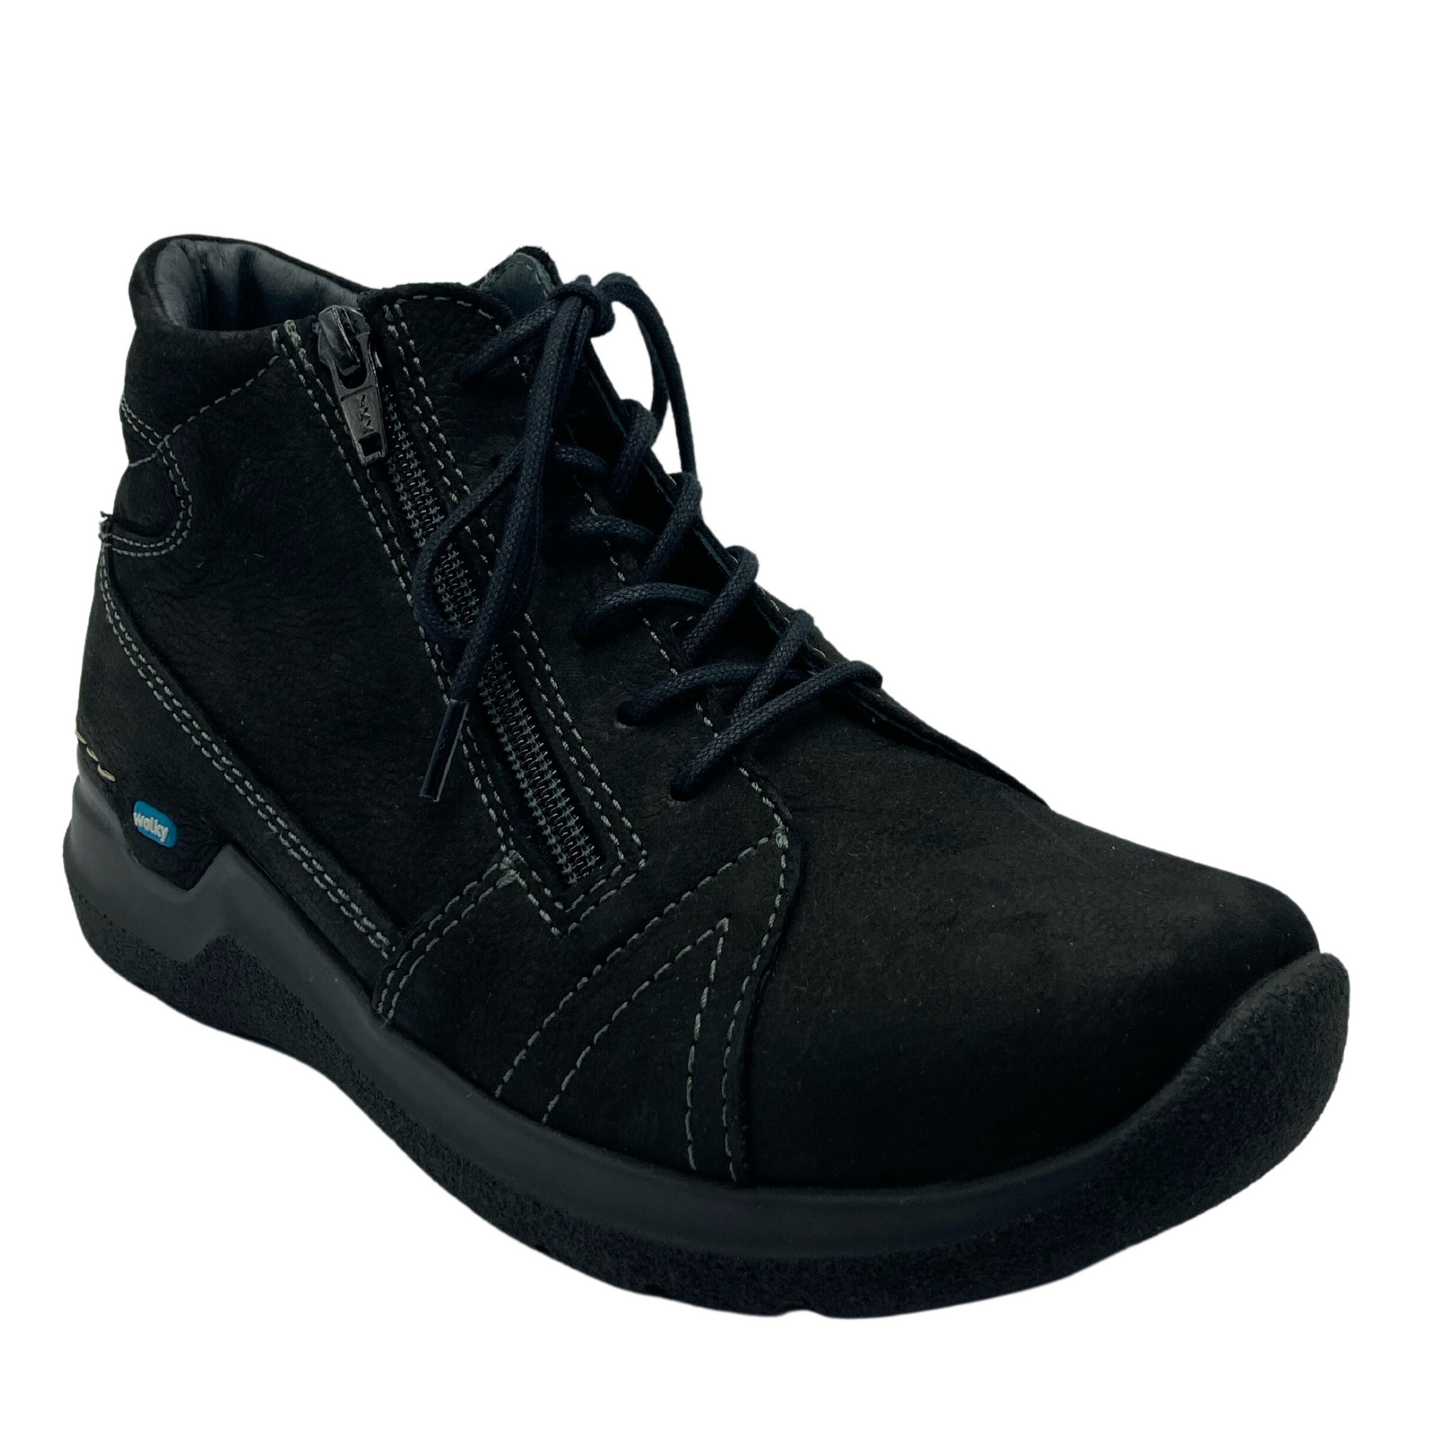 45 degree angled view of black leather walking shoe with laces and side zipper closure